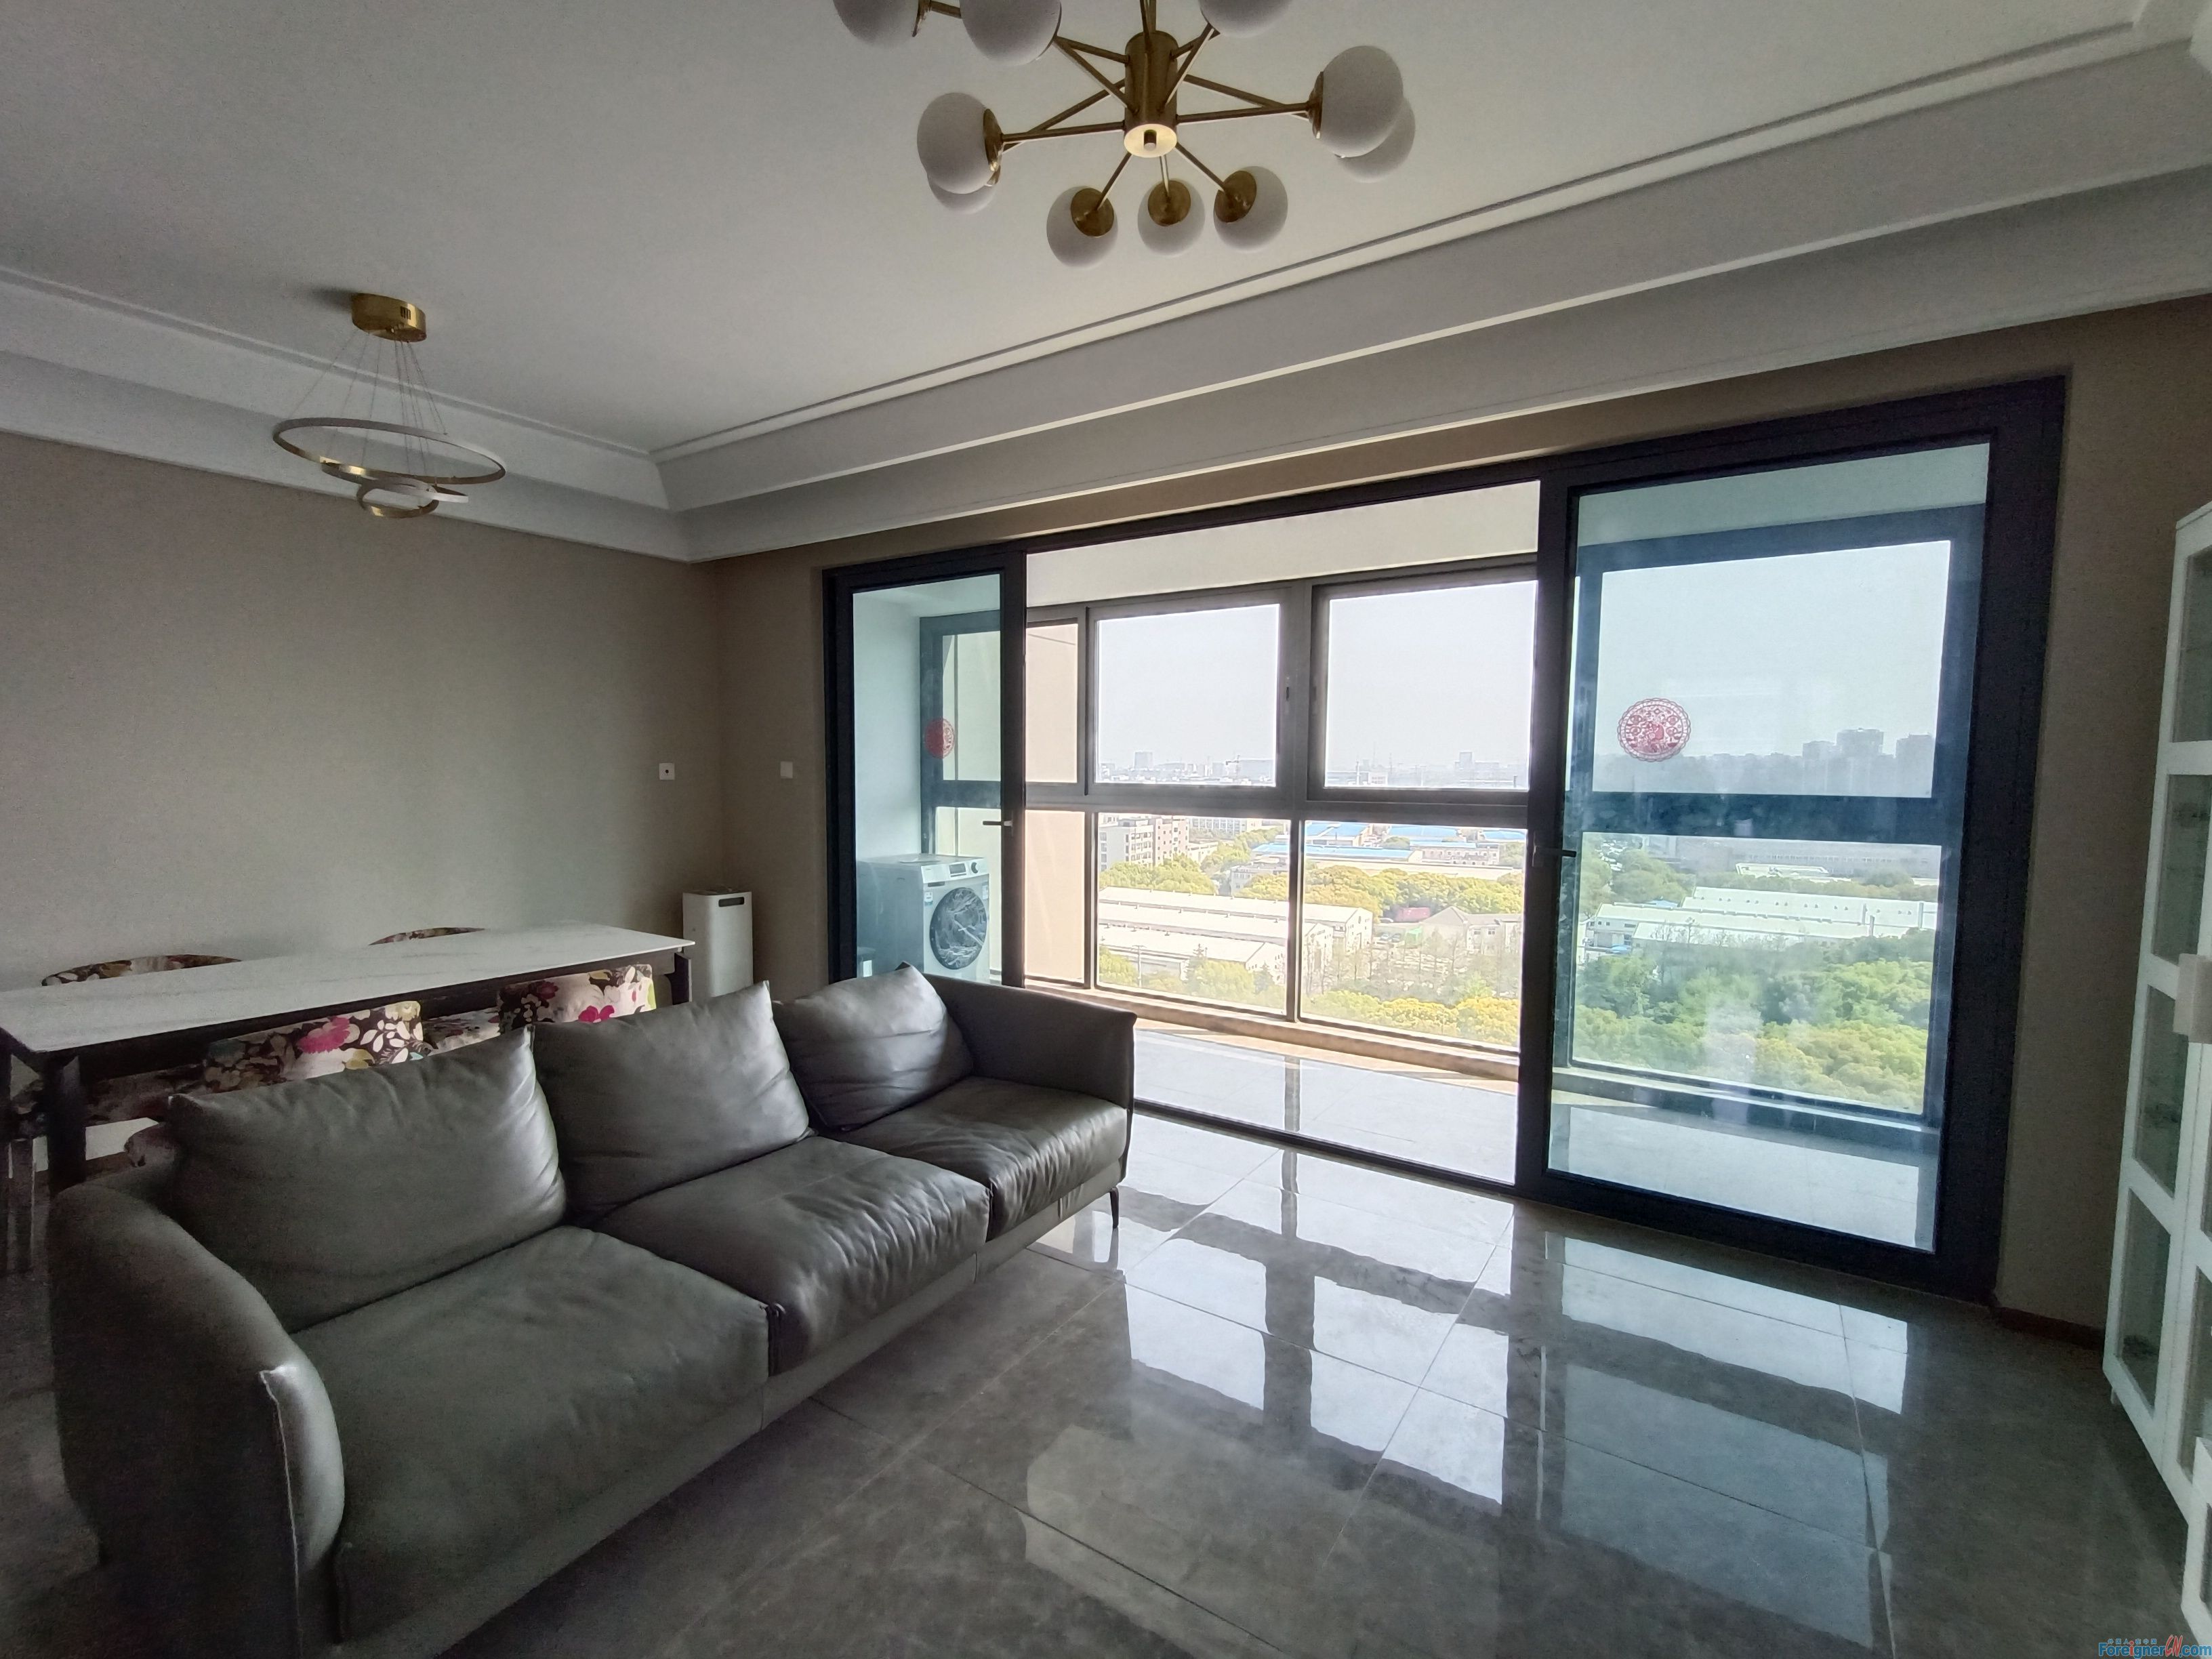  Amazing ！！Suzhou rental Bravura apartment for expats/ 4 bedrooms and 2 bathrooms/lots of sunlight/ open Balcony/ Olympic Center/ subway line 5 Nearby/ in SIP.